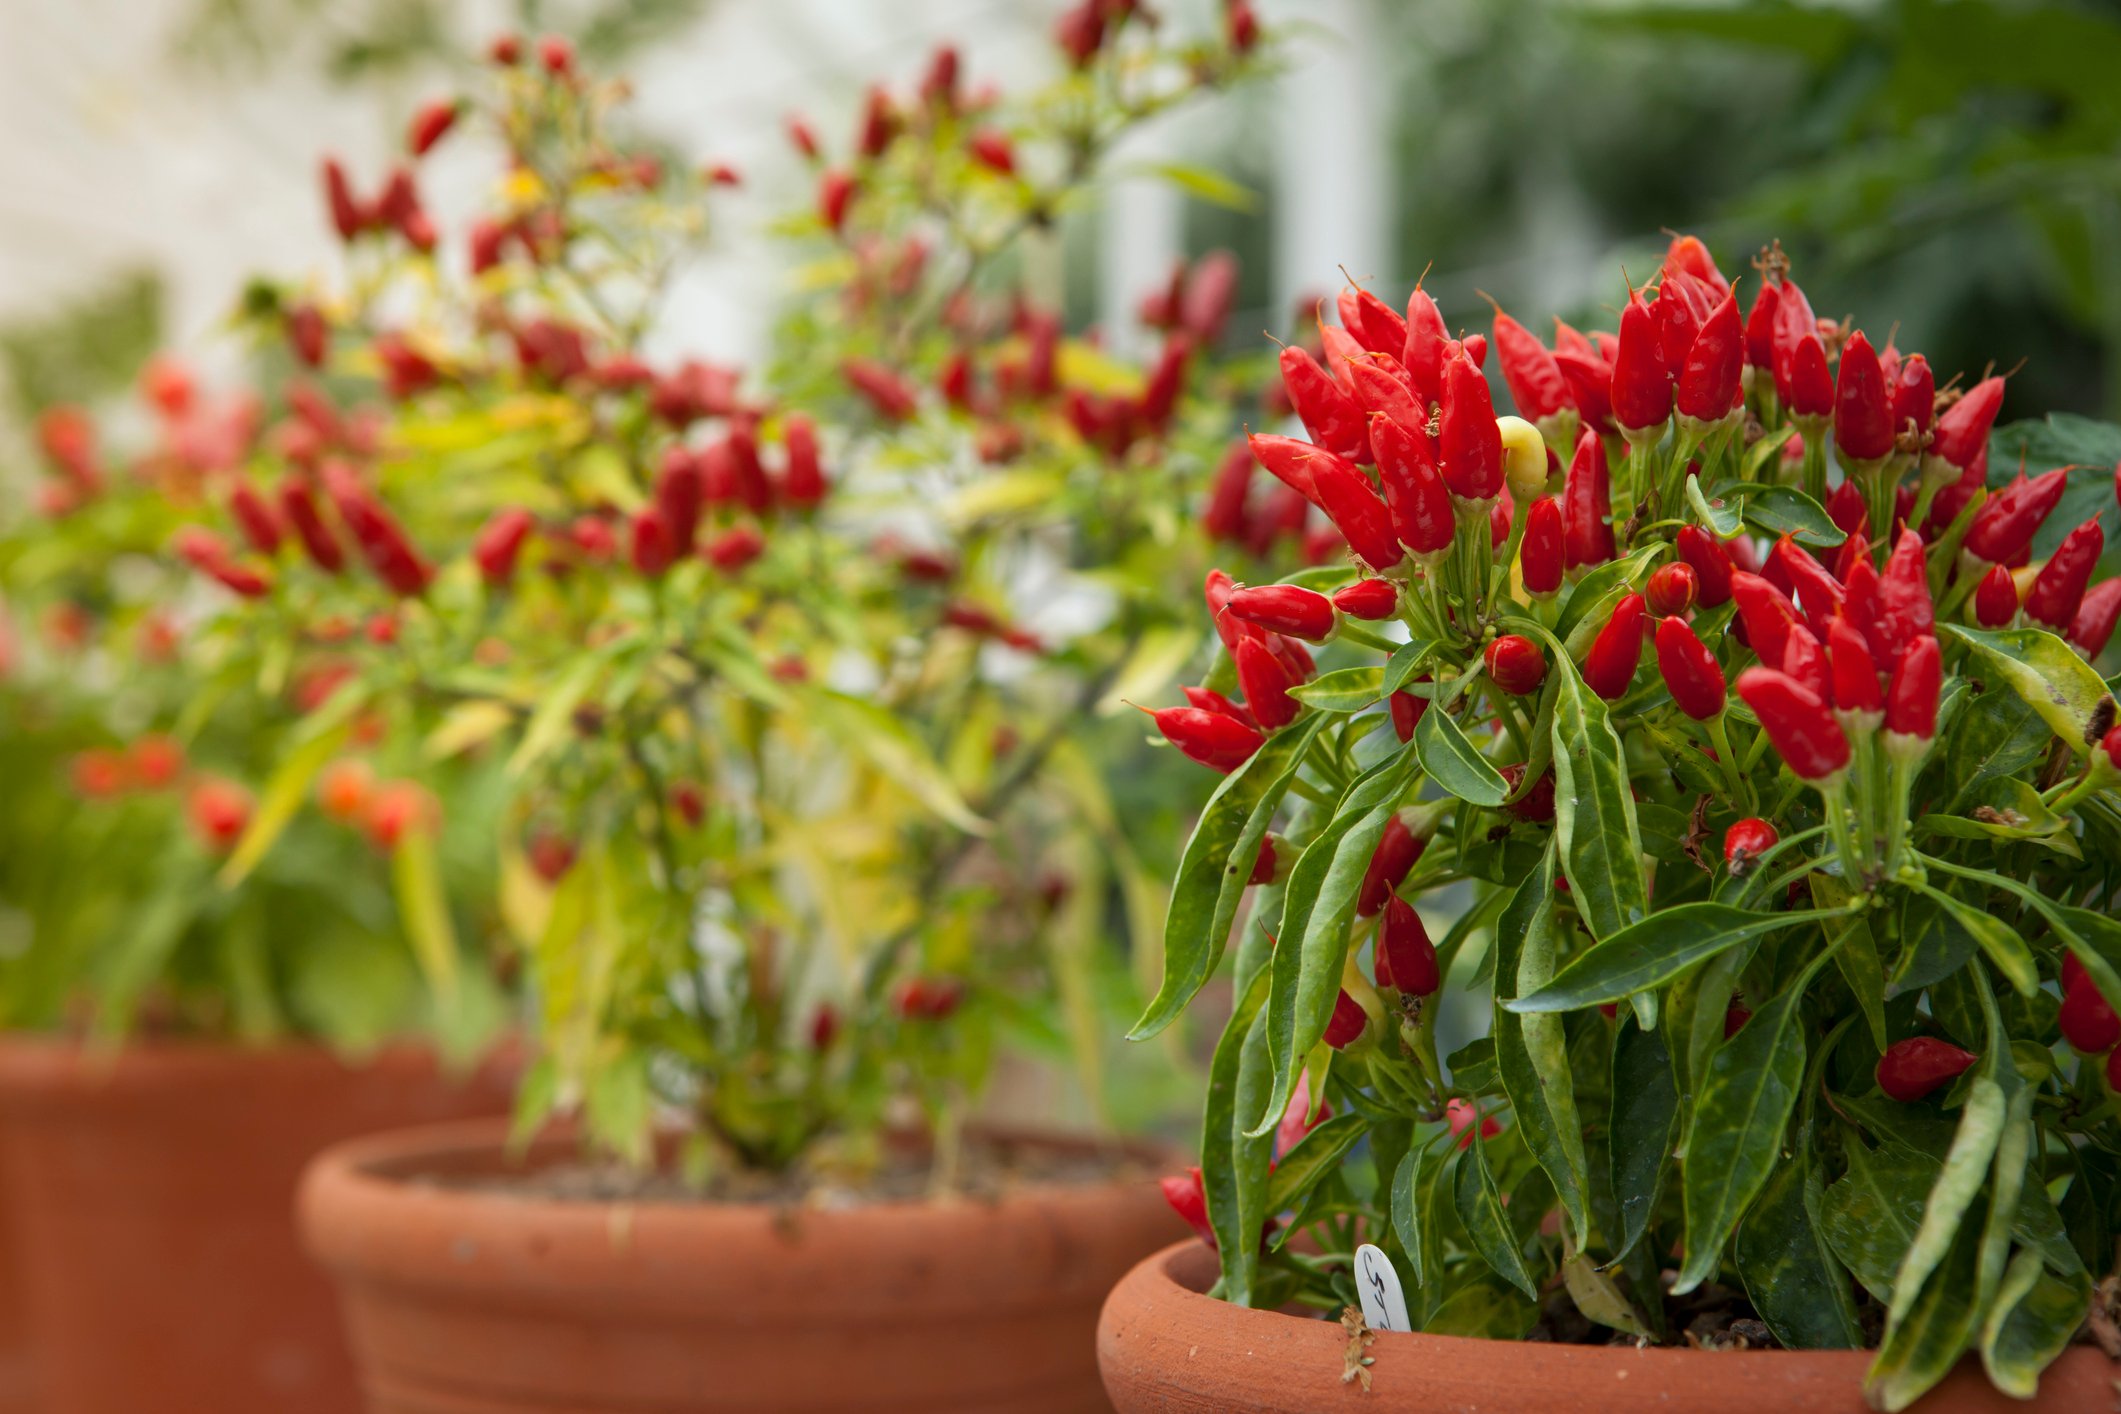 A pot of fiery chillies could be a good place to start. (iStock Photo)